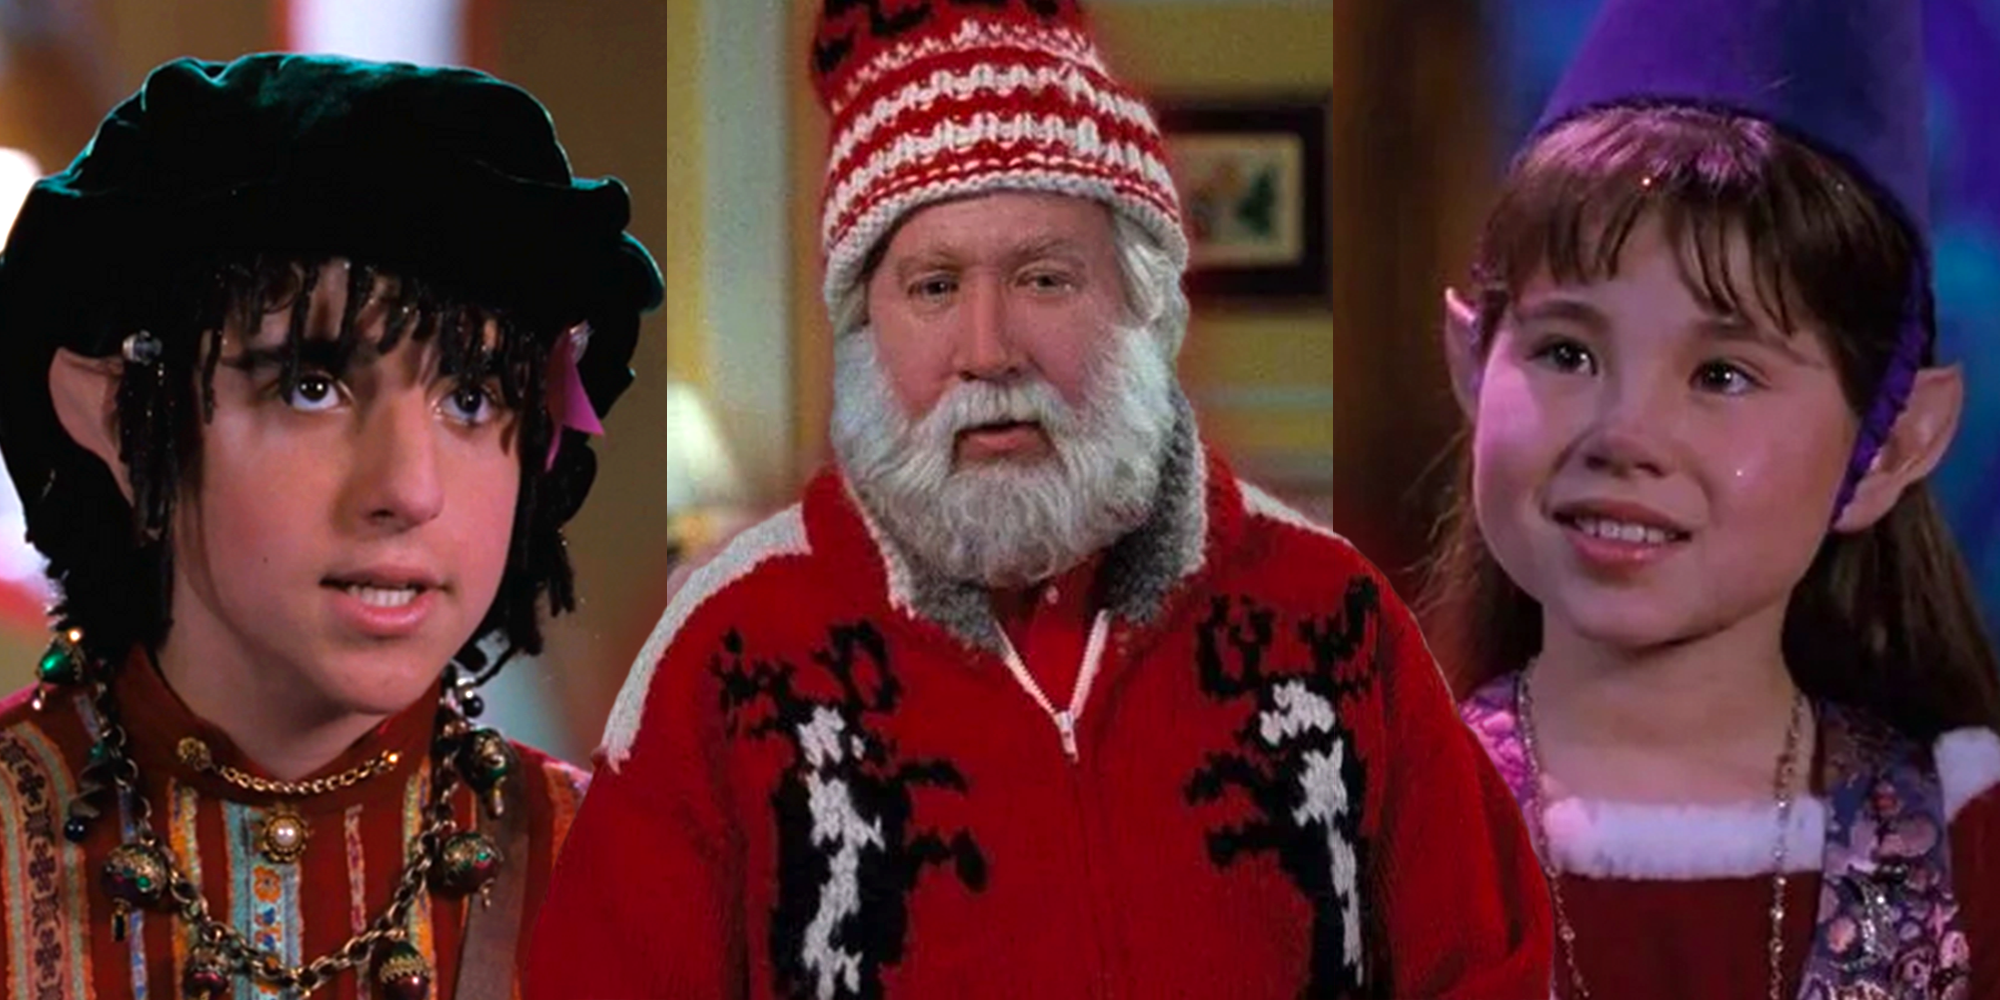 Three side by side images of the cahracters from the Santa Clause